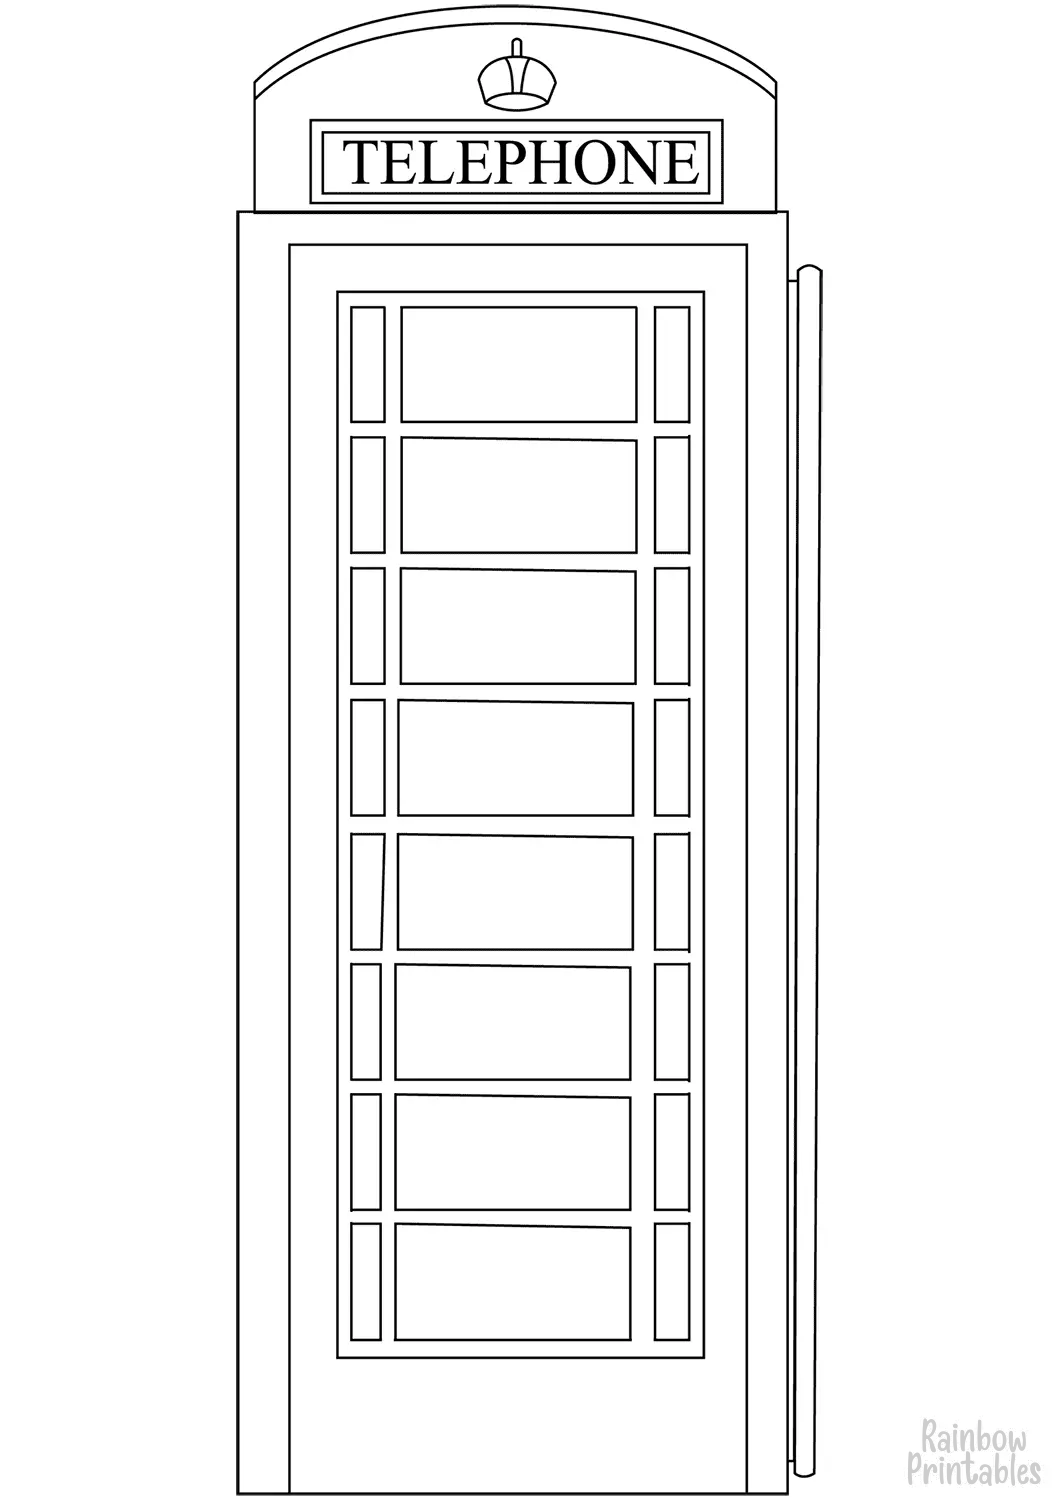 Red Telephone BOX Free Clipart Coloring Pages for Kids Adults Art Activities Line Art